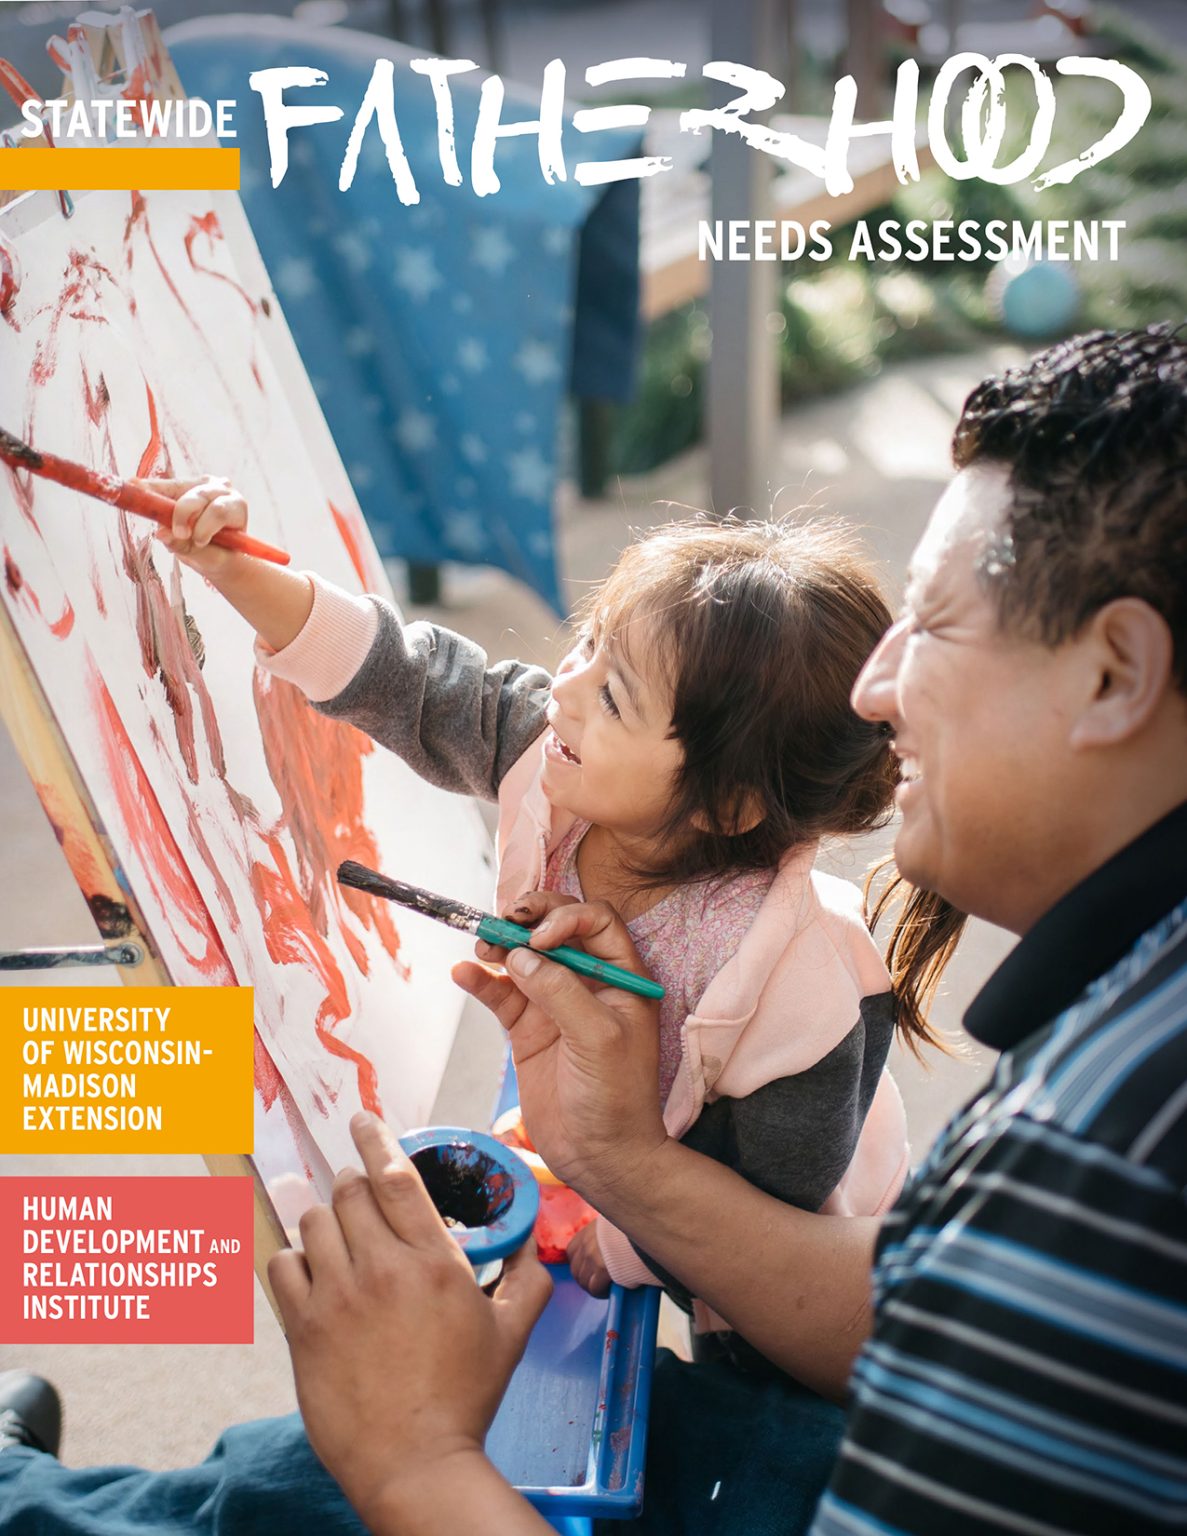 The cover of the fatherhood needs assessment report featuring a father painting with his child